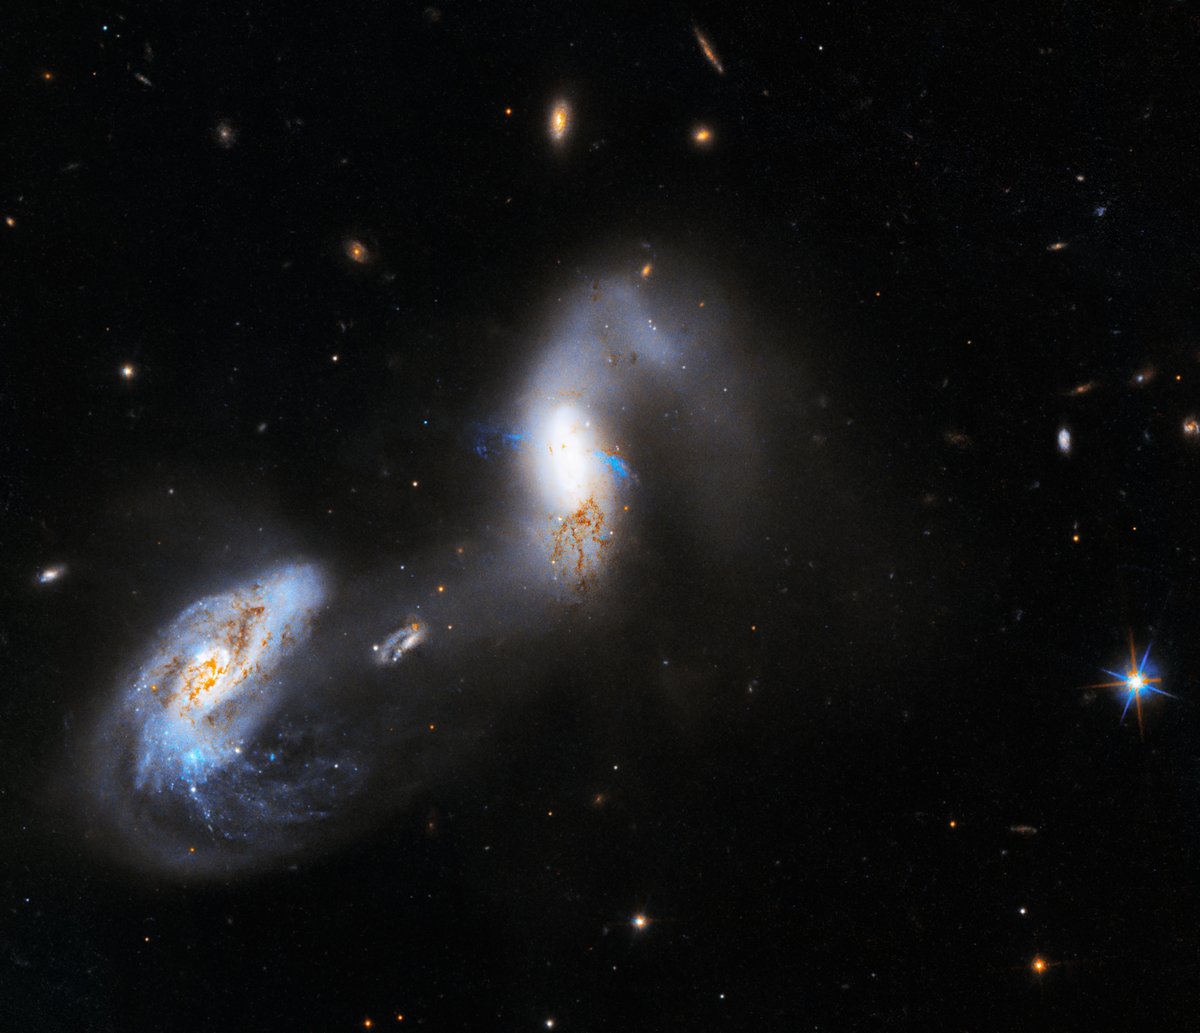 Interacting galaxies, known as AM 1214-255, shine bright in this new view from Hubble!

Both galaxies contain active galactic nuclei, which are luminous central regions that host a black hole. Learn more for #BlackHoleWeek: go.nasa.gov/3VoUSa9